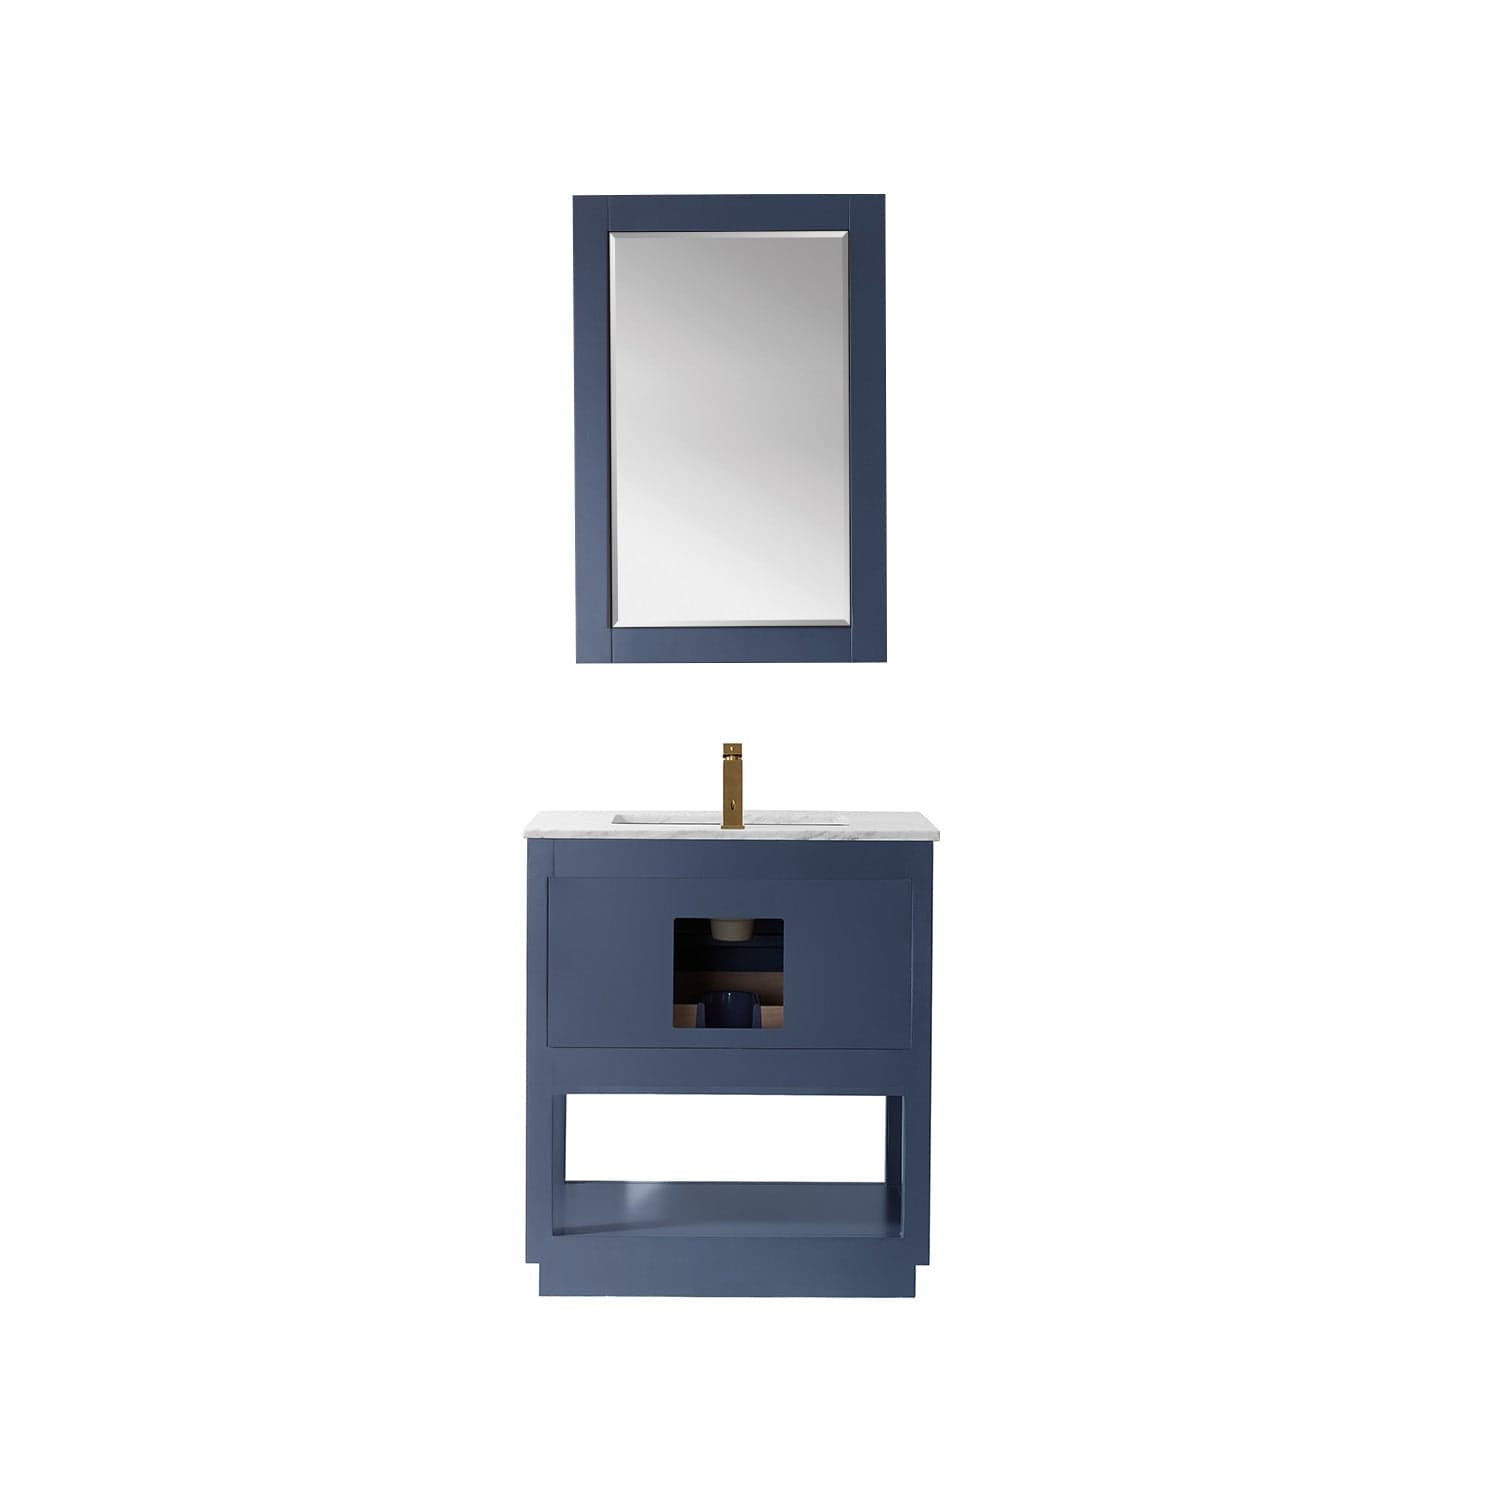 Altair Remi 30" Single Bathroom Vanity Set in Royal Blue and Carrara White Marble Countertop with Mirror 532030-RB-CA - Molaix631112971355Vanity532030-RB-CA